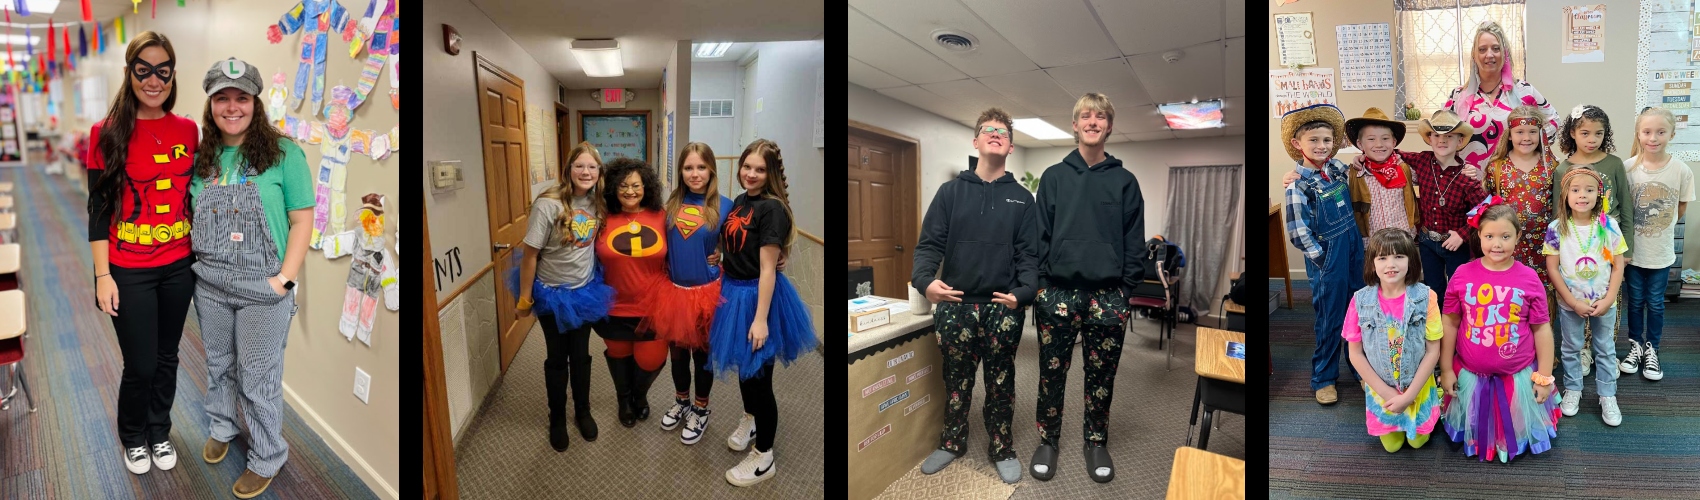 Spirit Week - Students and Staff